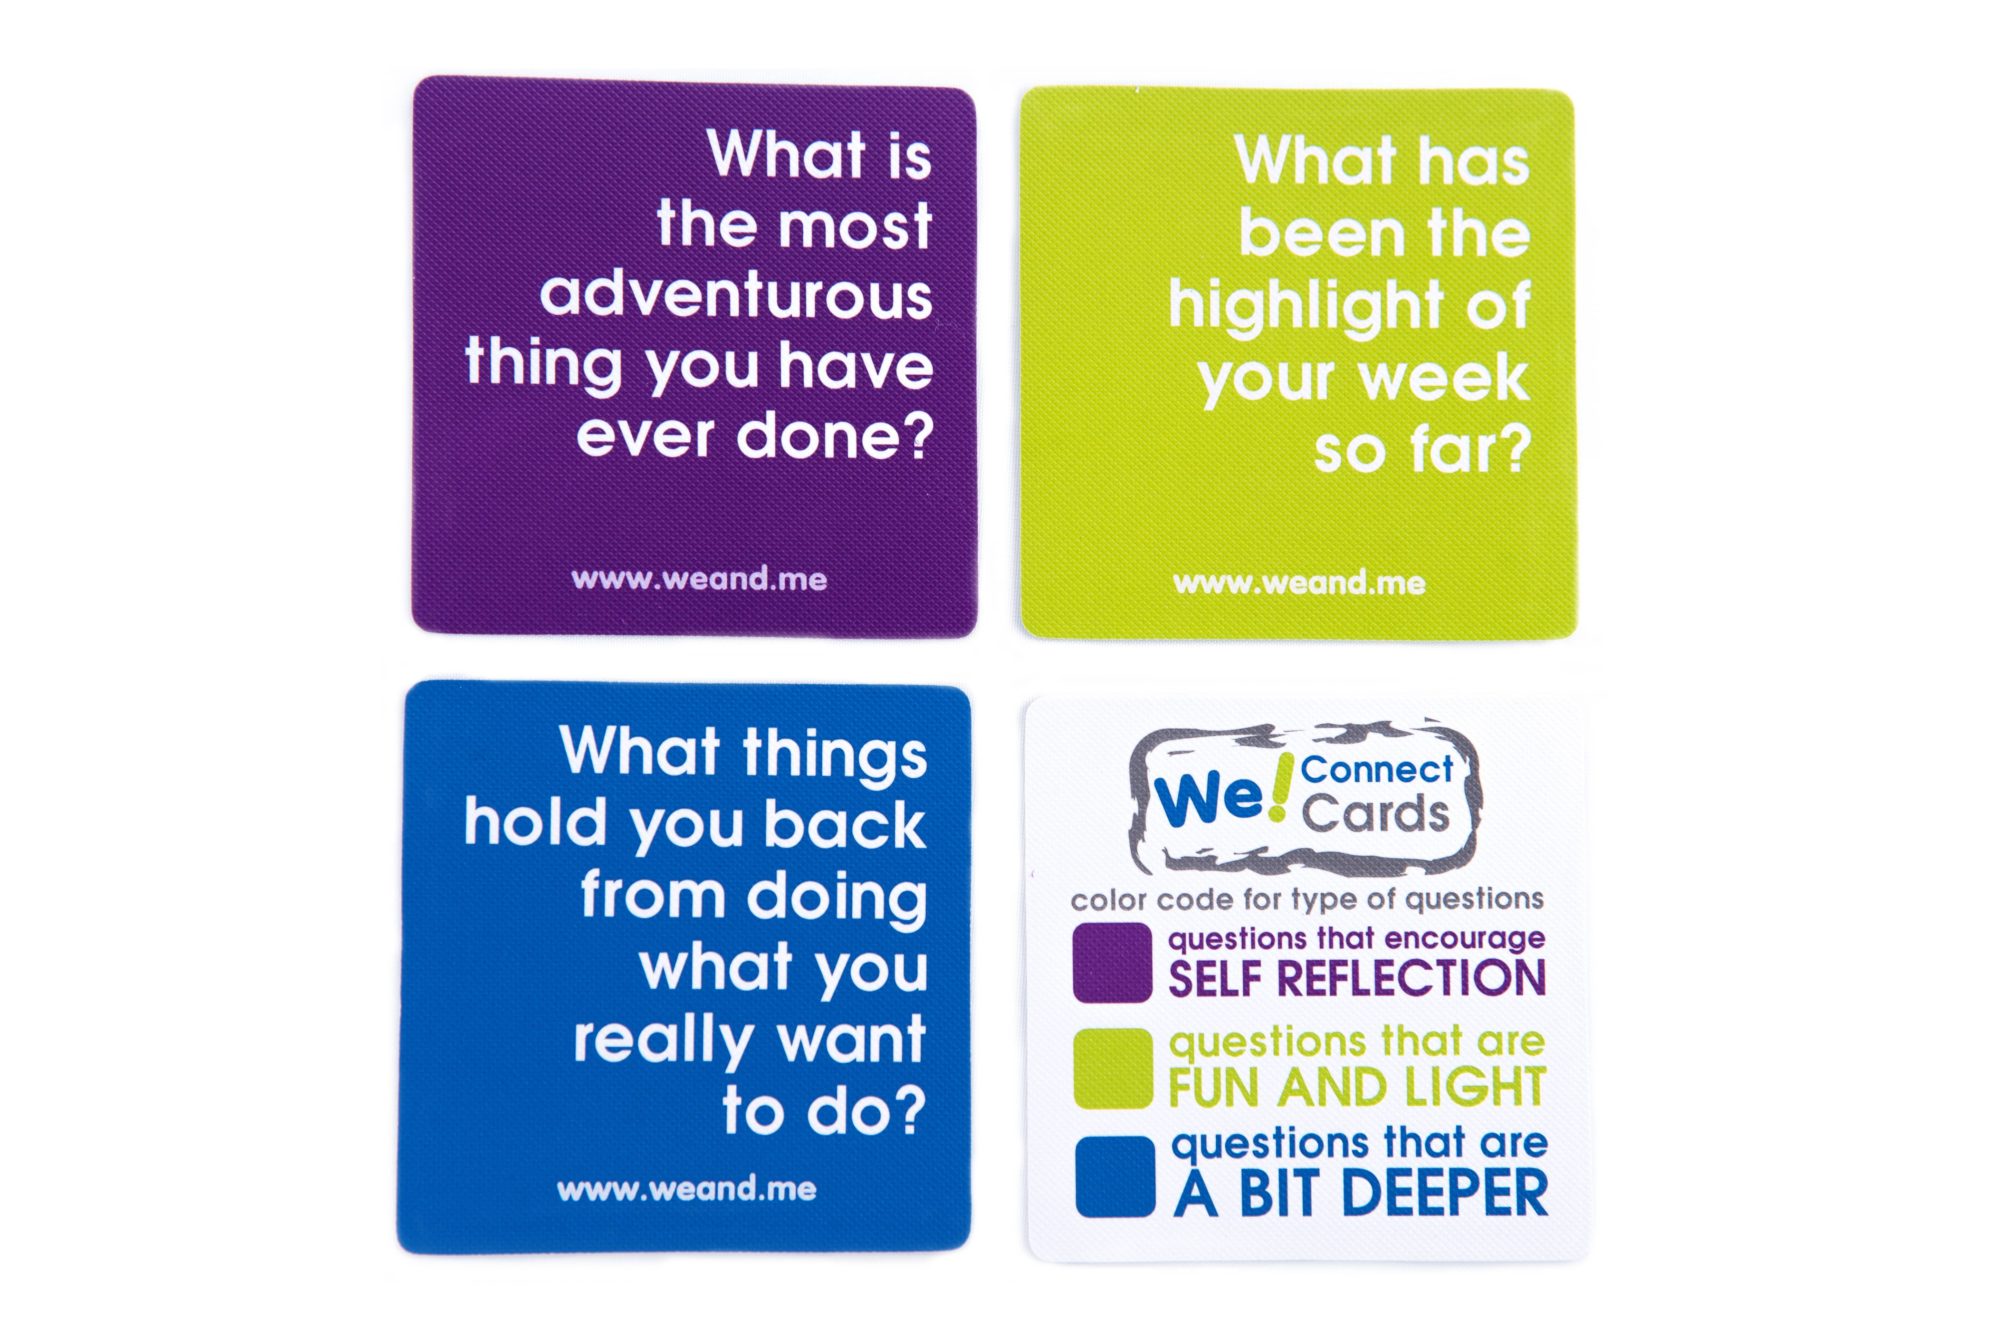 Ice Breaking questions Cards. We connect. From to Cards. Dilap connection Card. Connect карта